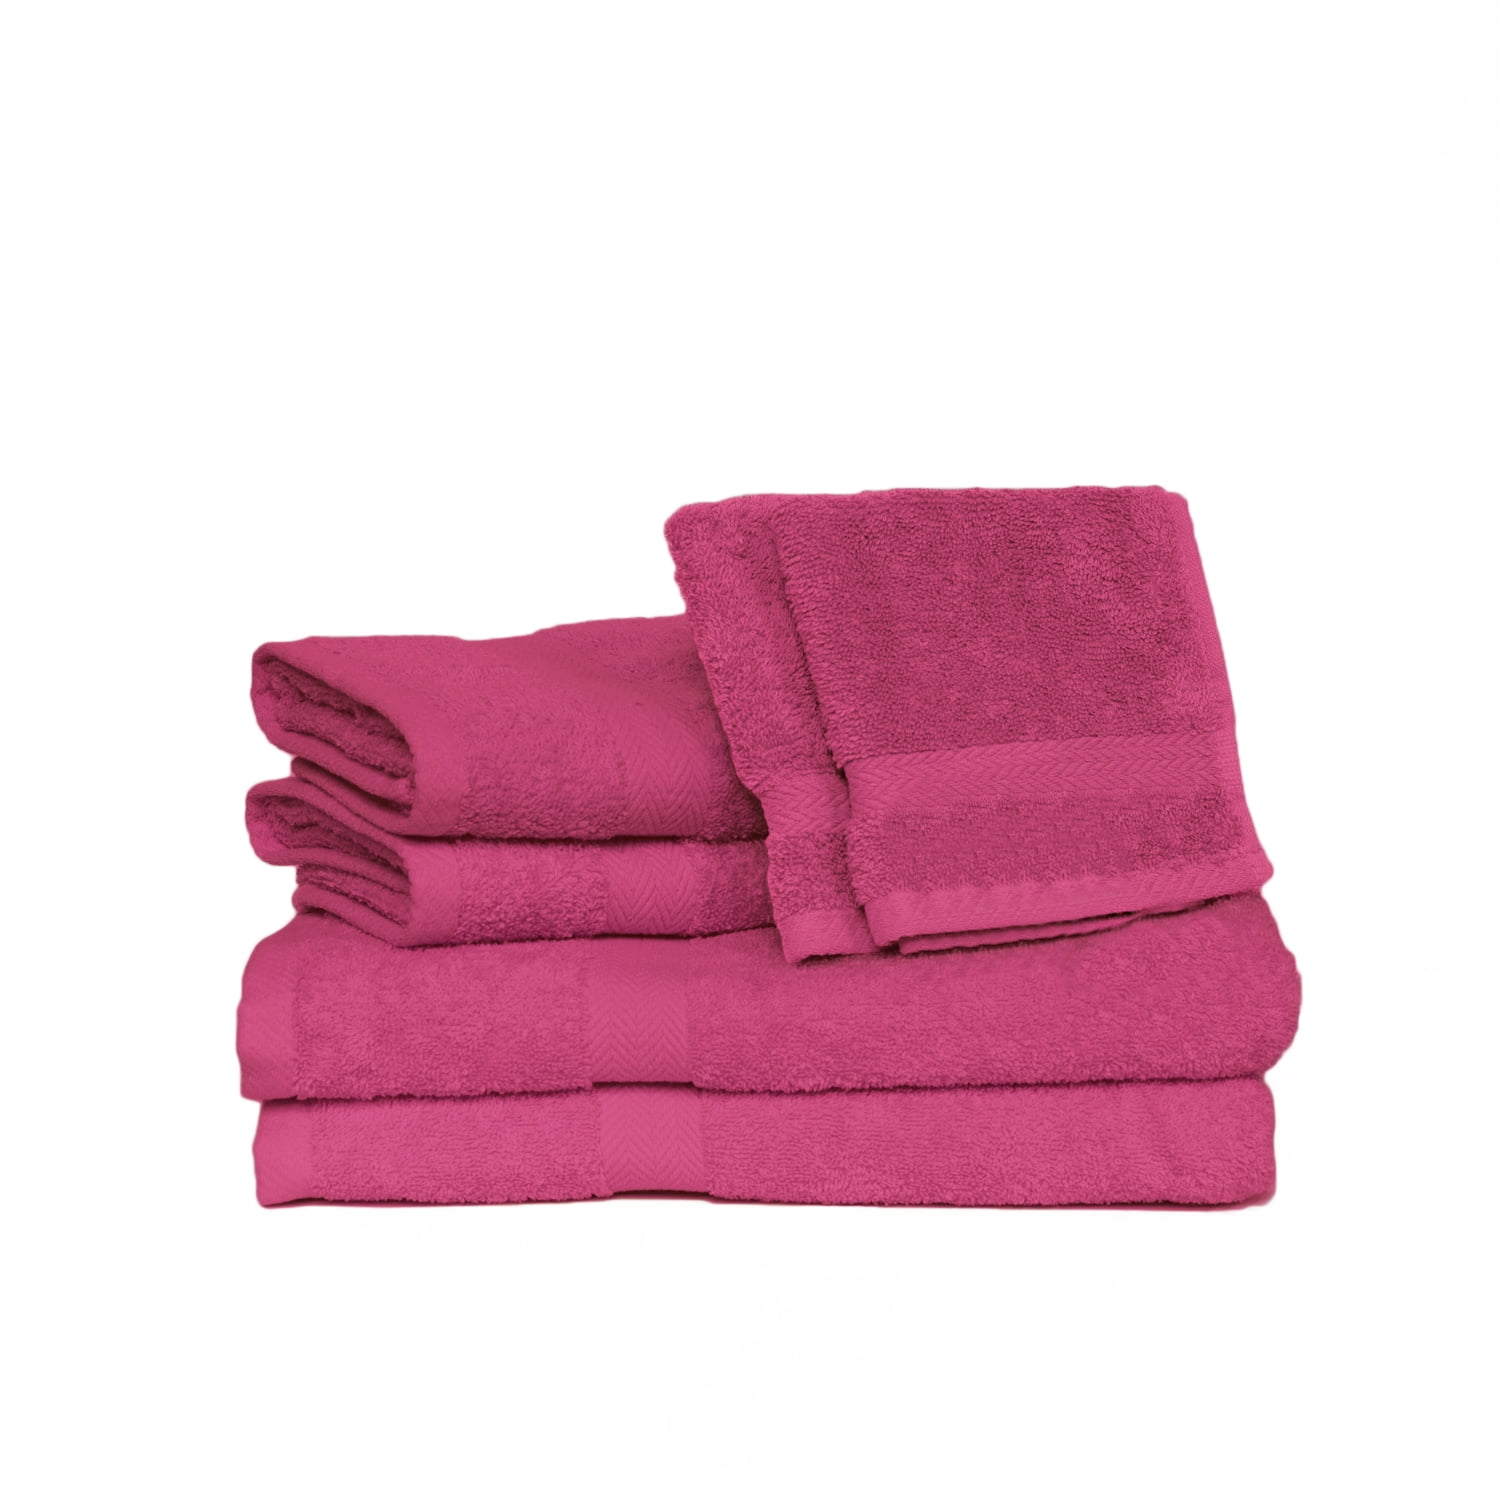 Purple Berry and Hot Pink Dish Towel Set with Green Rick Rack